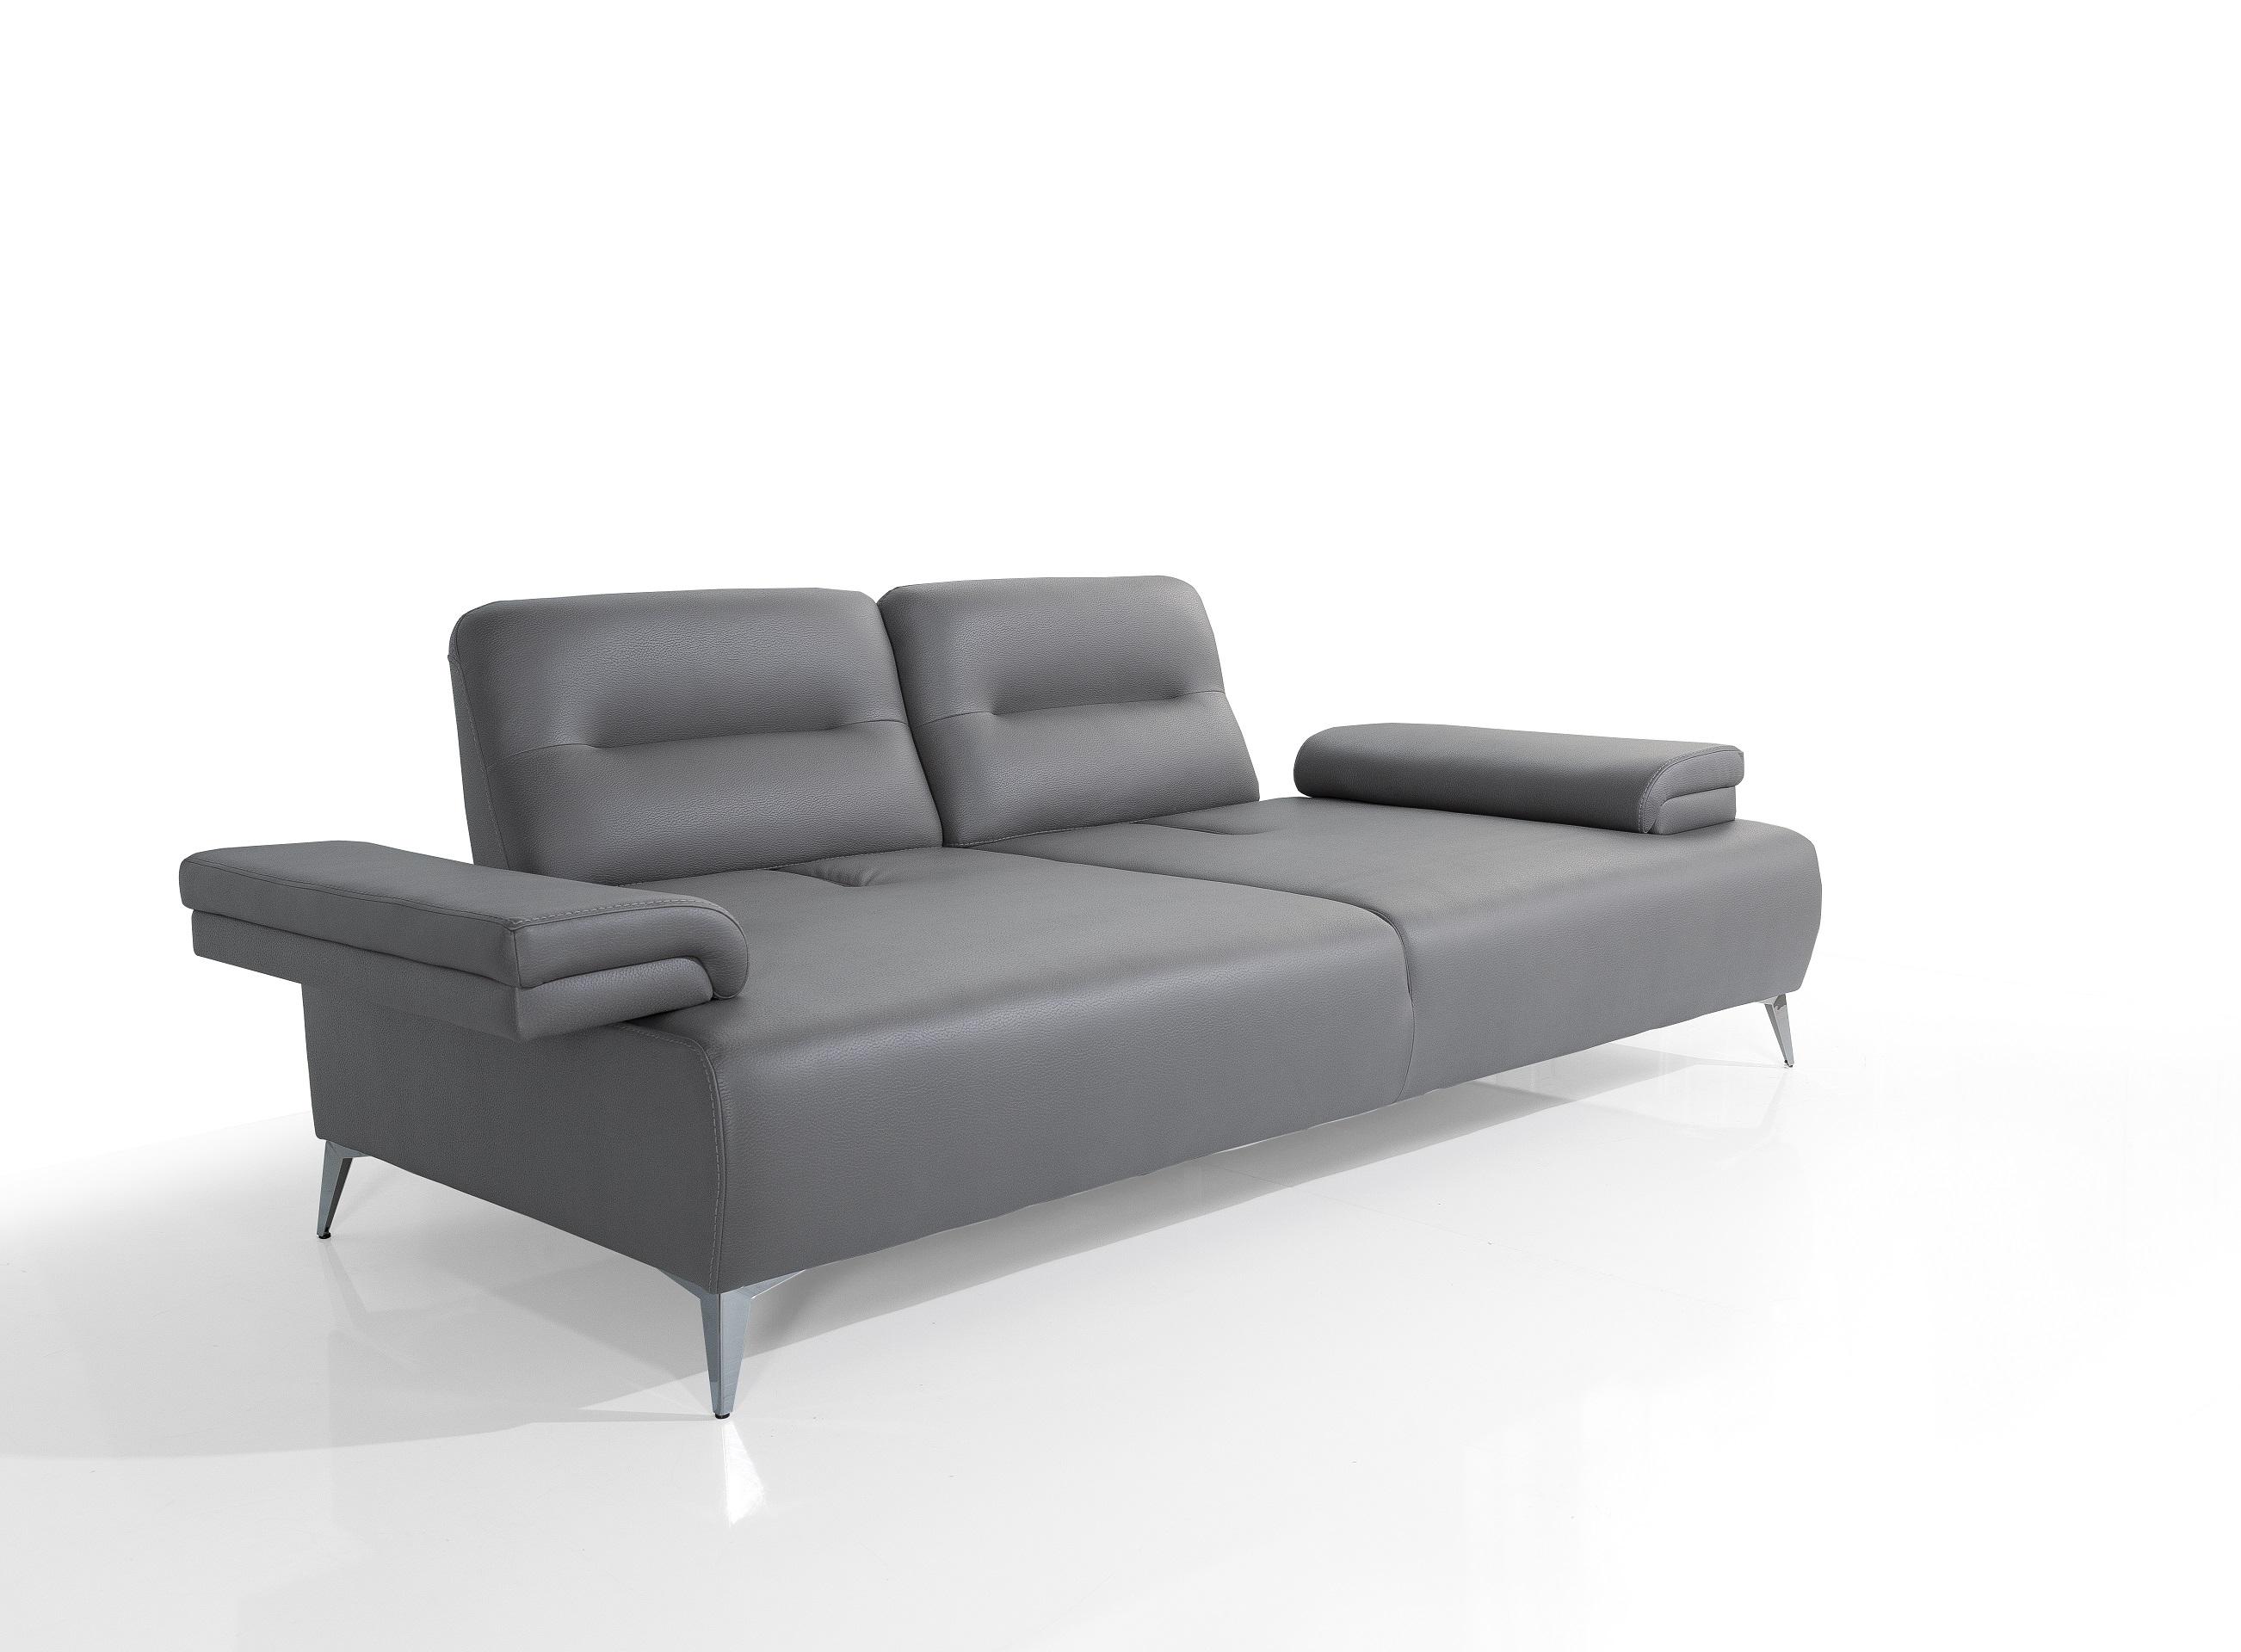 Contemporary Sofa bed SO1759-LGRY Ruslan SO1759-LGRY in Light Gray 